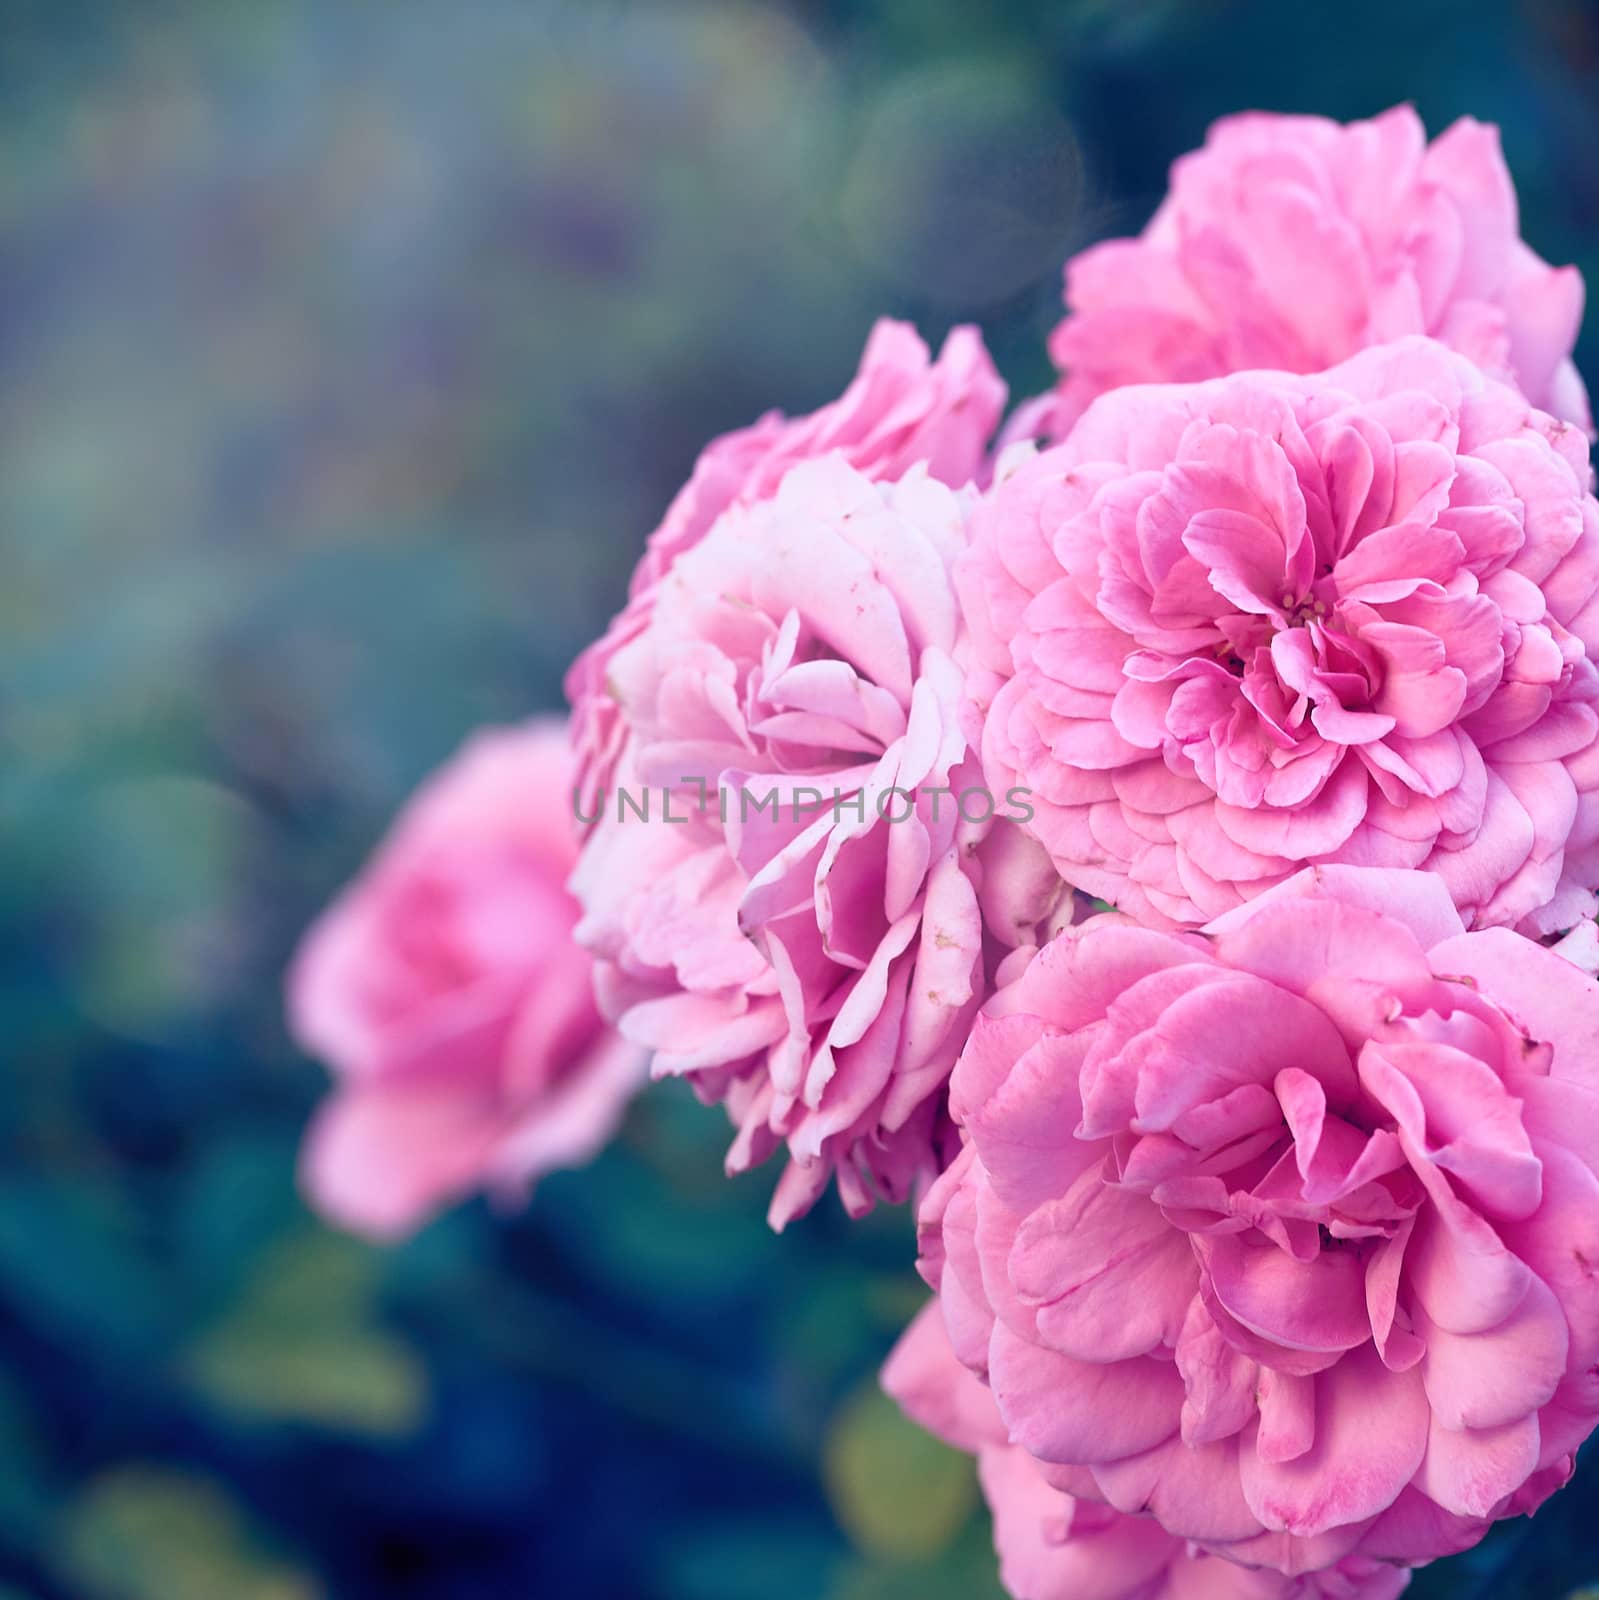 buds of pink blooming roses in the garden by ndanko